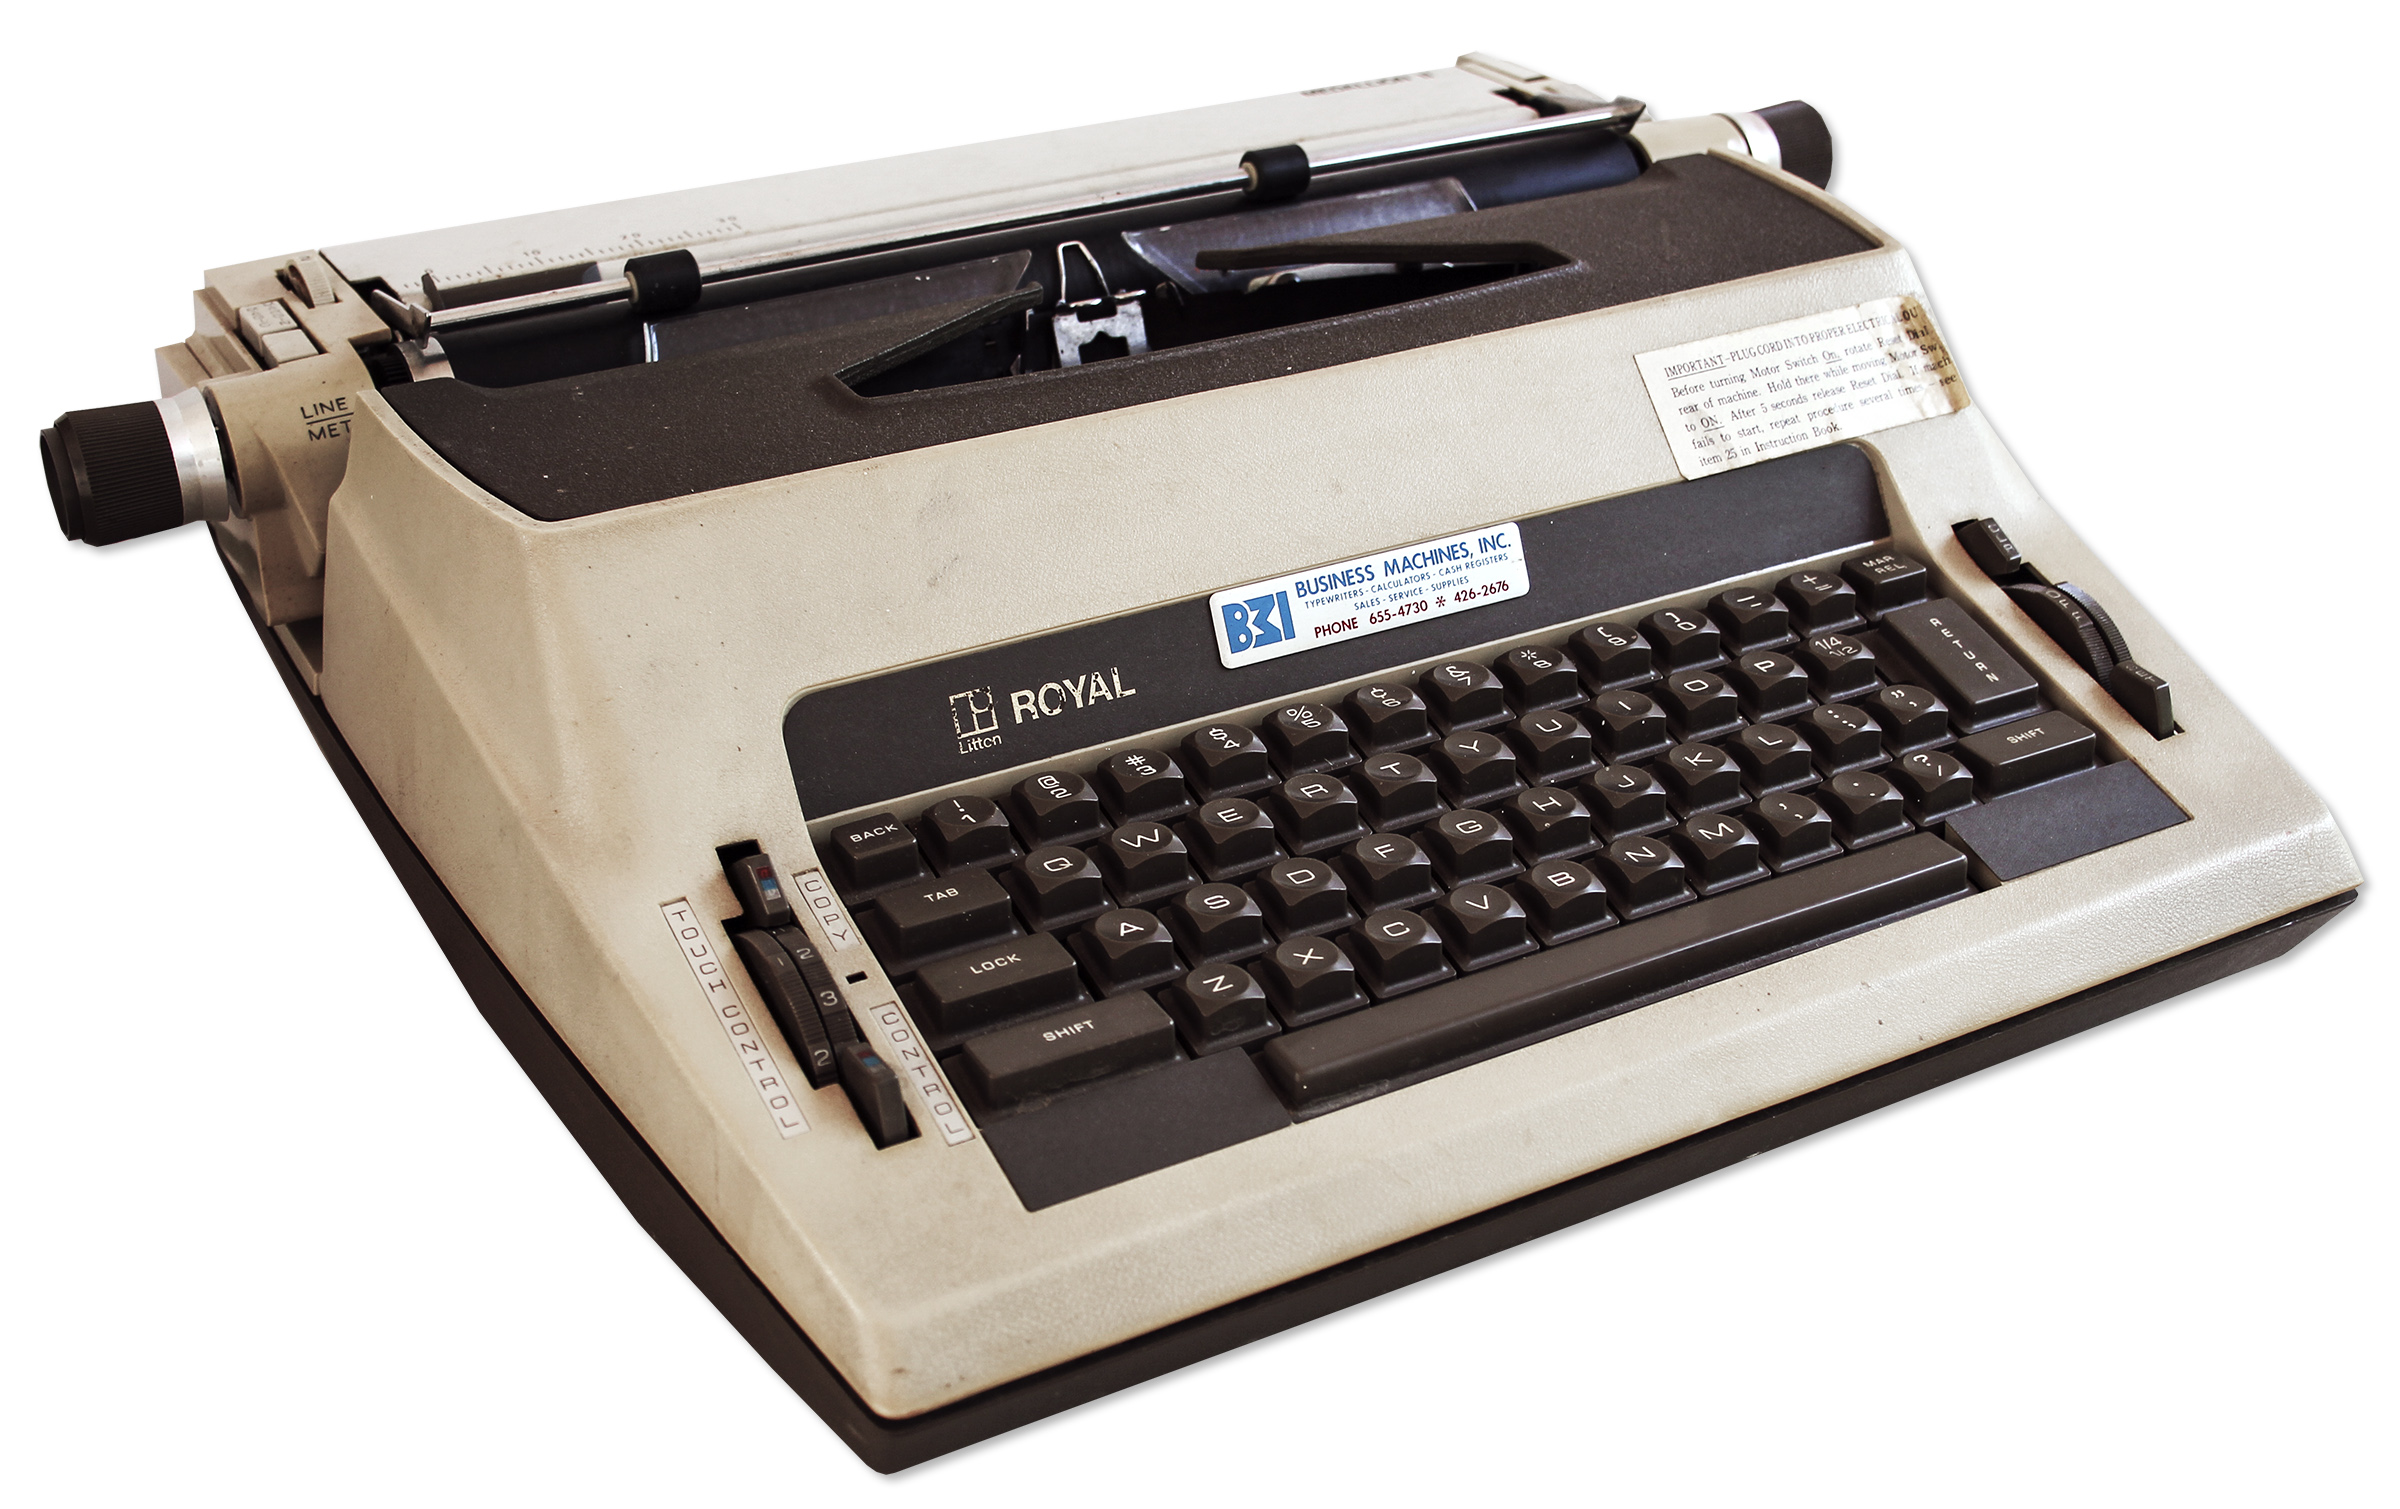 Royal portable electric typewriter owned by the Kennedy family. The tan Medallion II typewriter